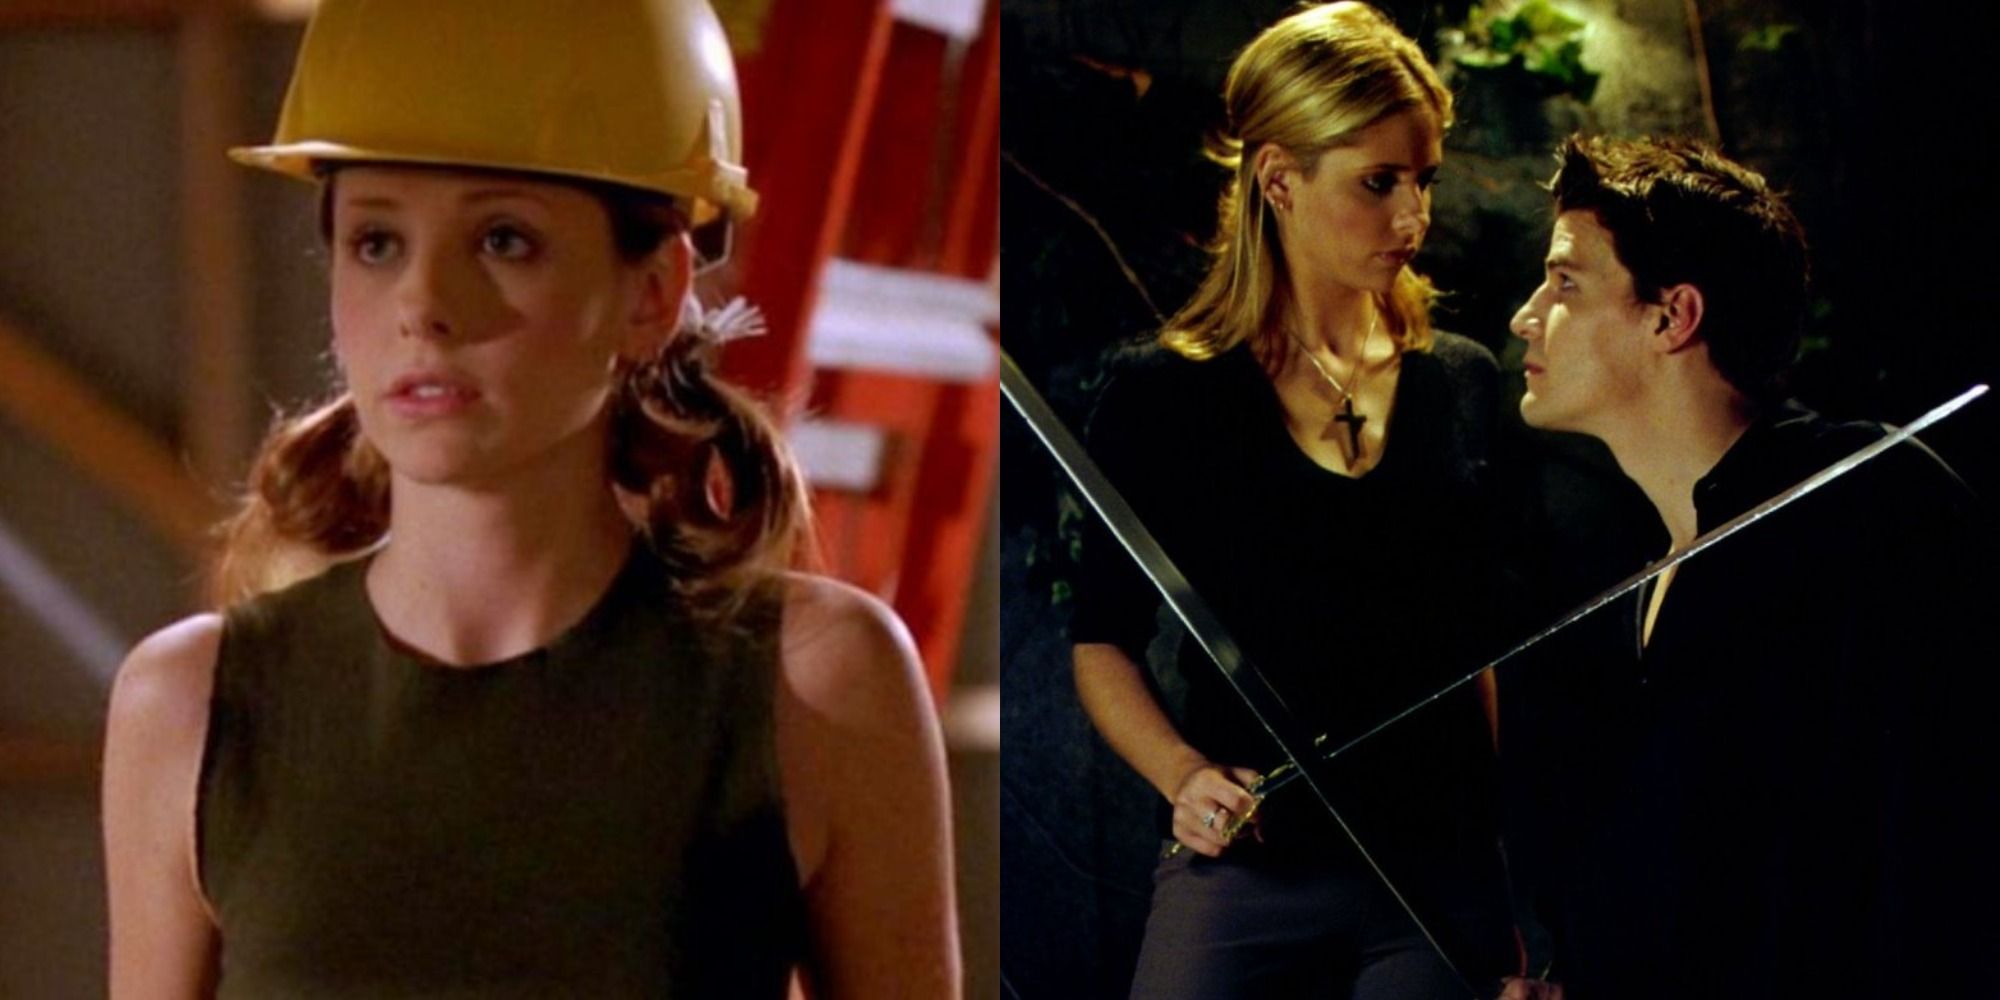 Buffy split image in a hard hat and with angel